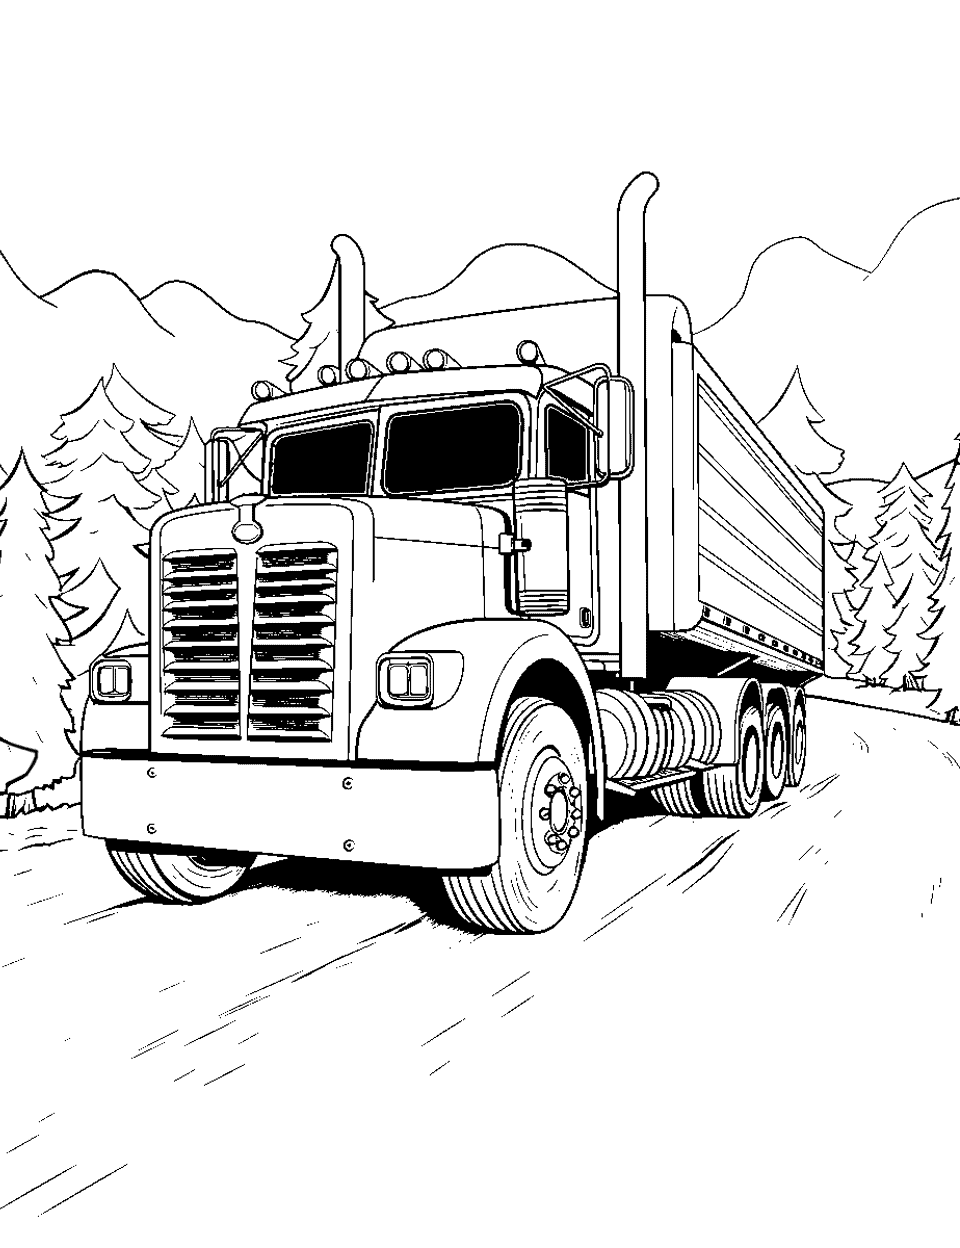 Peterbilt On the road Coloring Page - A Peterbilt truck driving on a long road going for its destination.